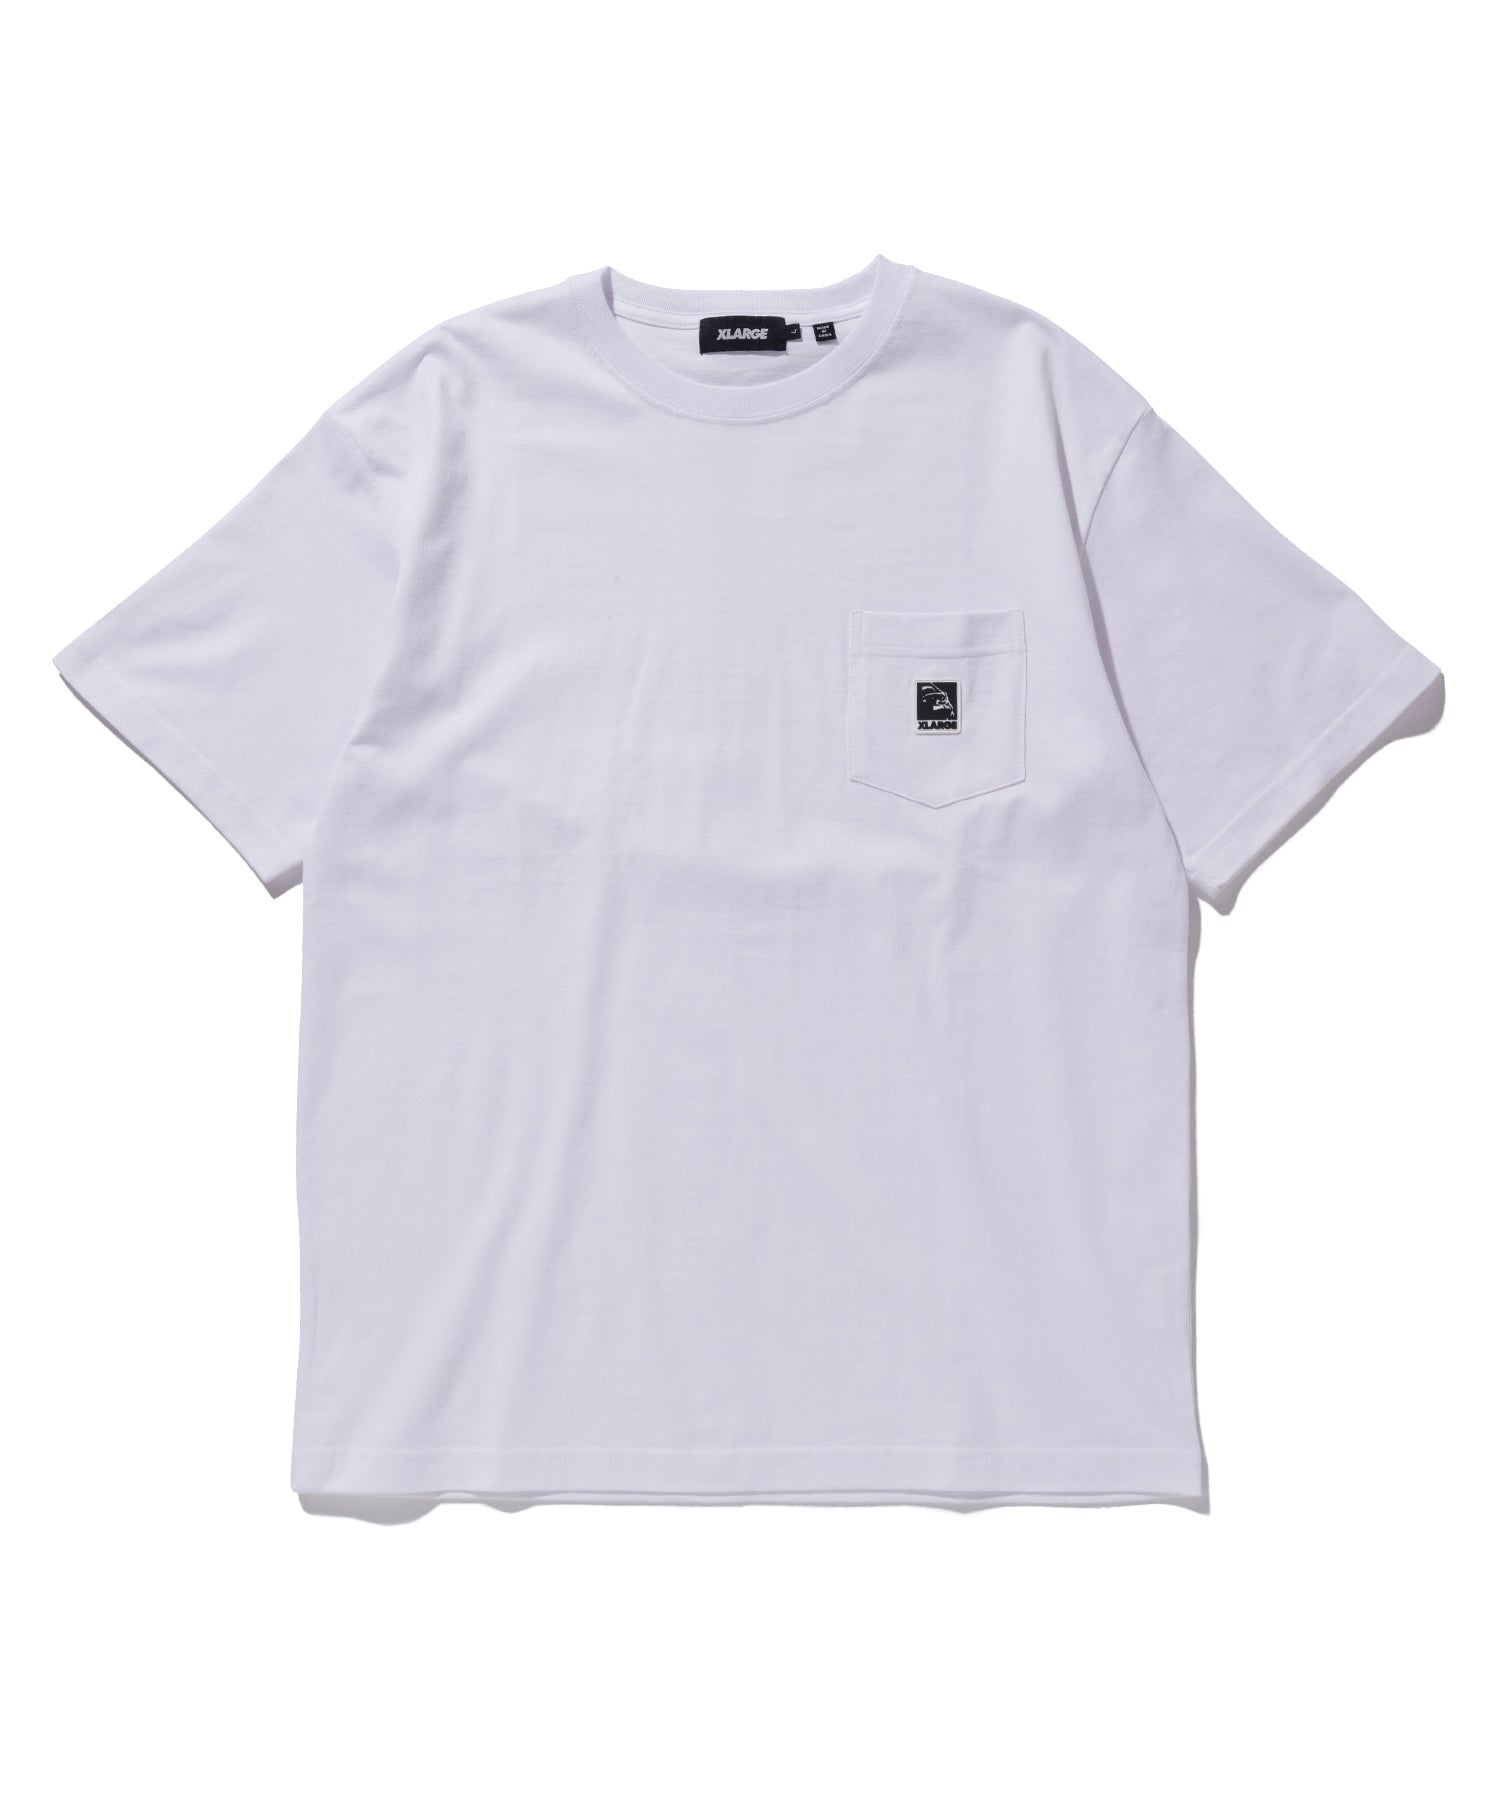 BACK IN STOCK – XLARGE